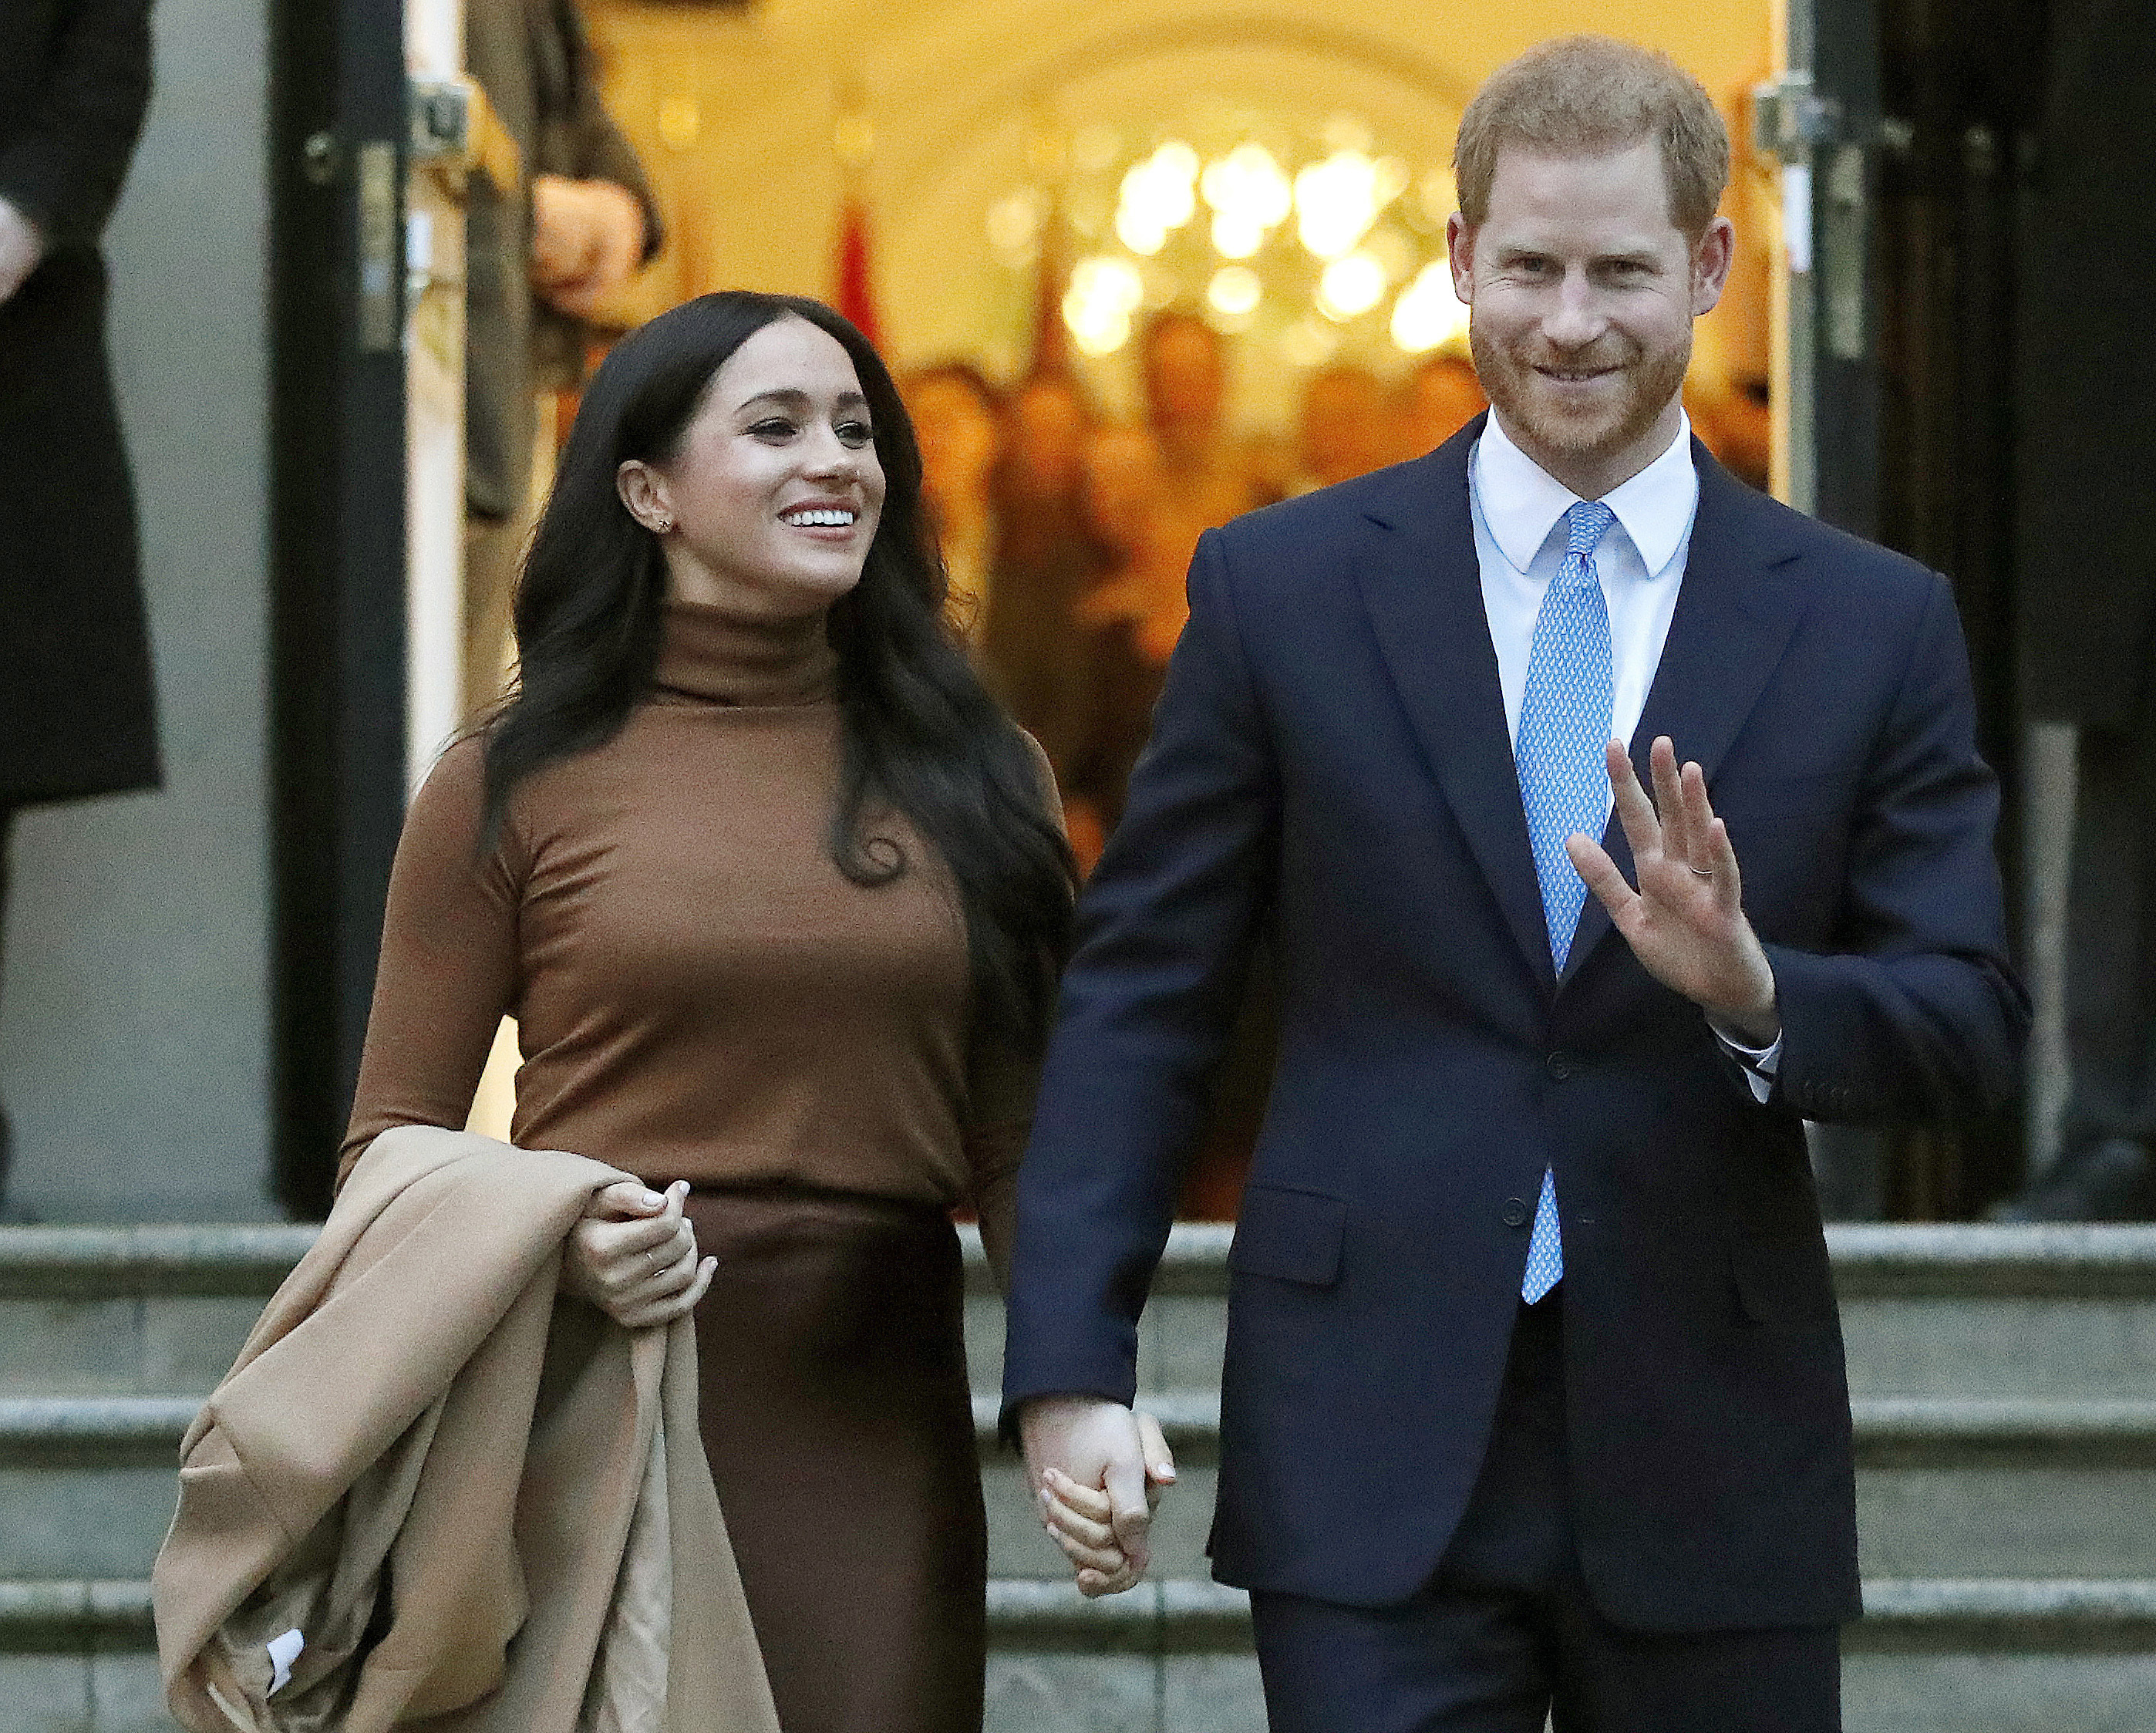 Tensions had reached an all-time high after Harry and Meghan stepped down as senior working members of the Firm in 2020.